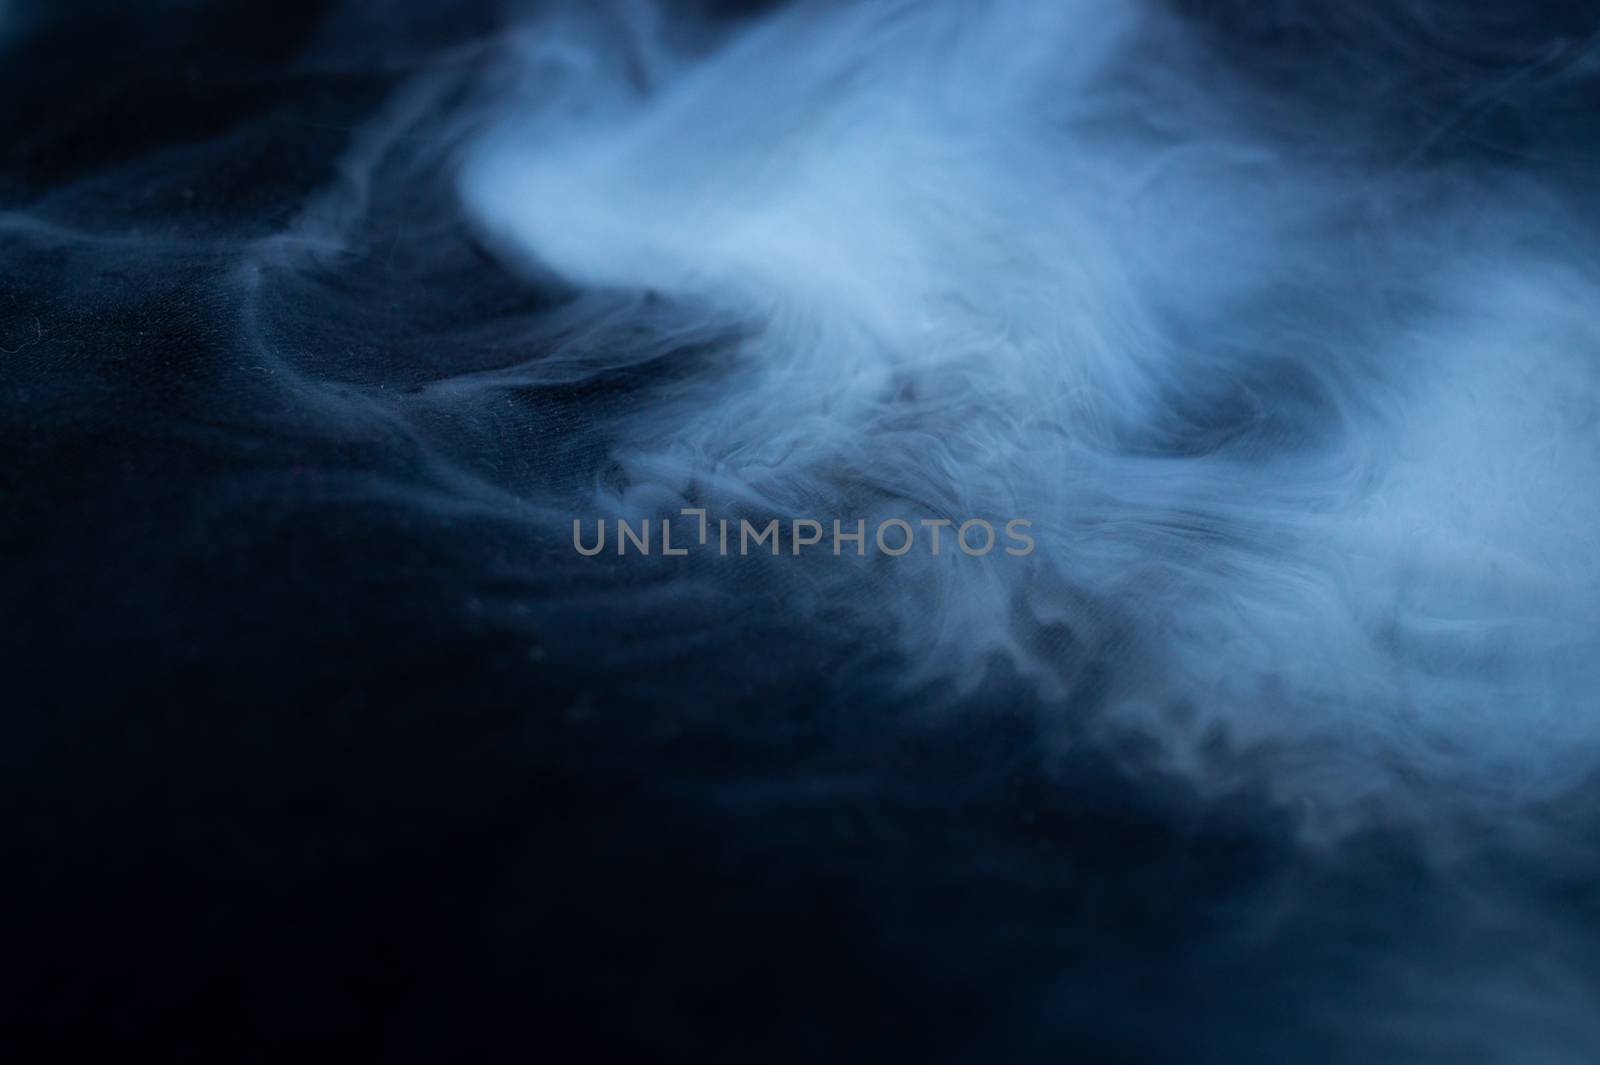 White smoke on black fabric background. Smoke spreads over the background. Vaping culture, life without cigarettes. Conceptual image.